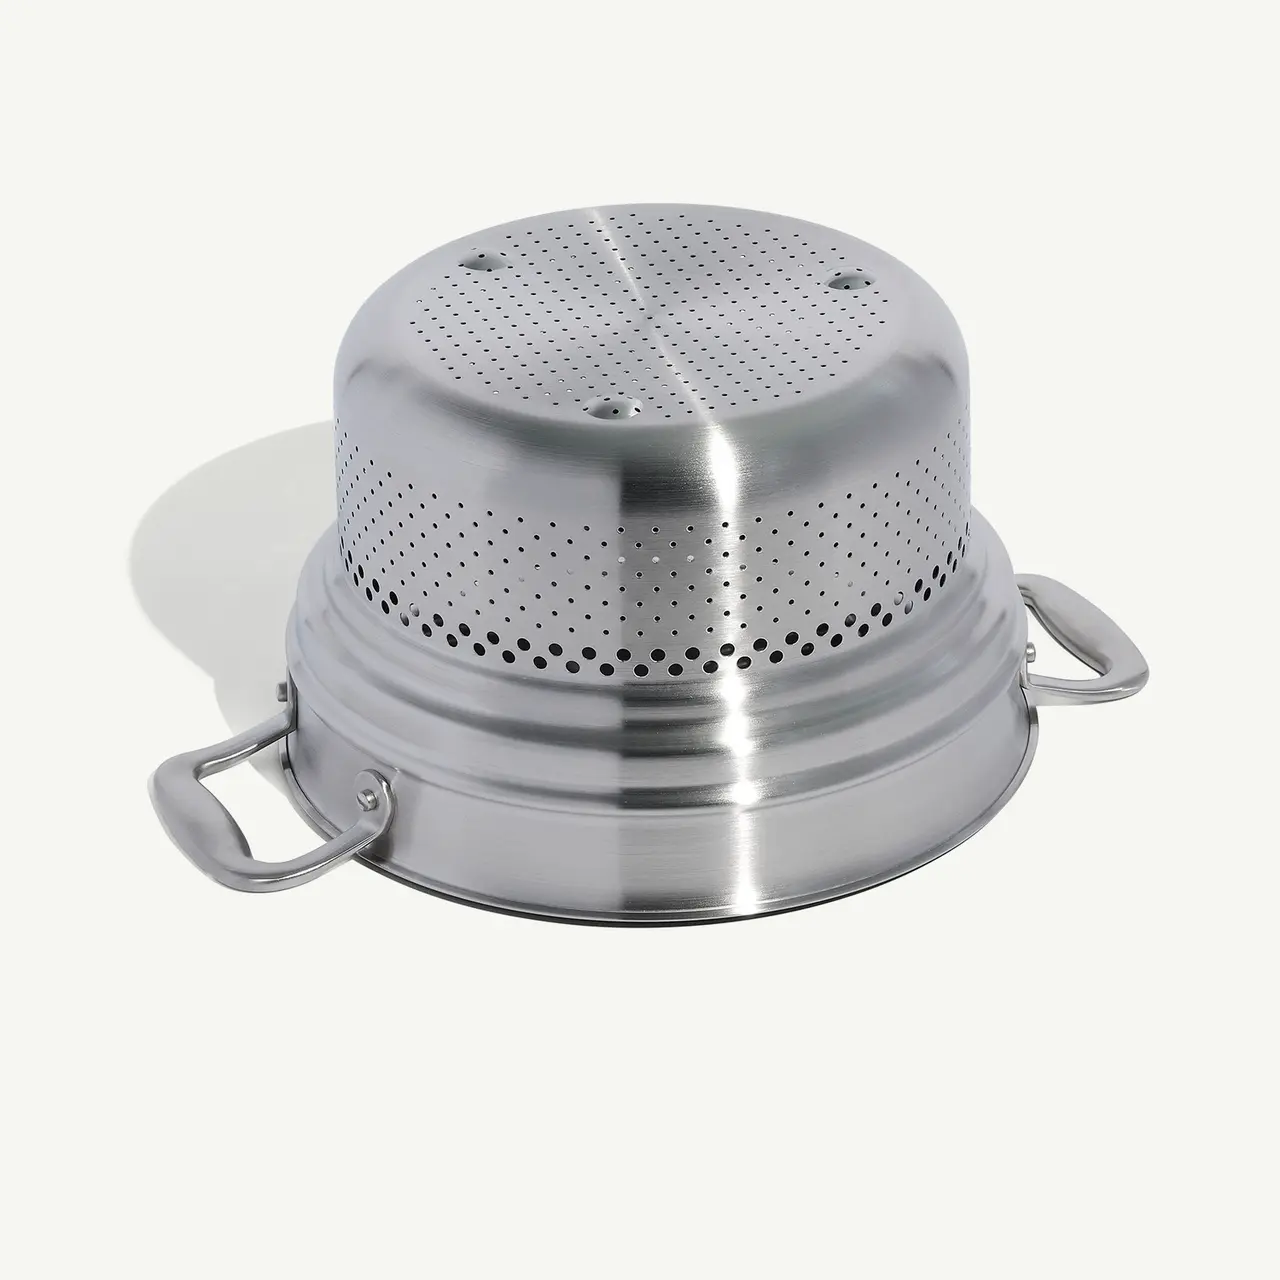 A stainless steel food steamer insert with perforated top and side handles rests on a light background.